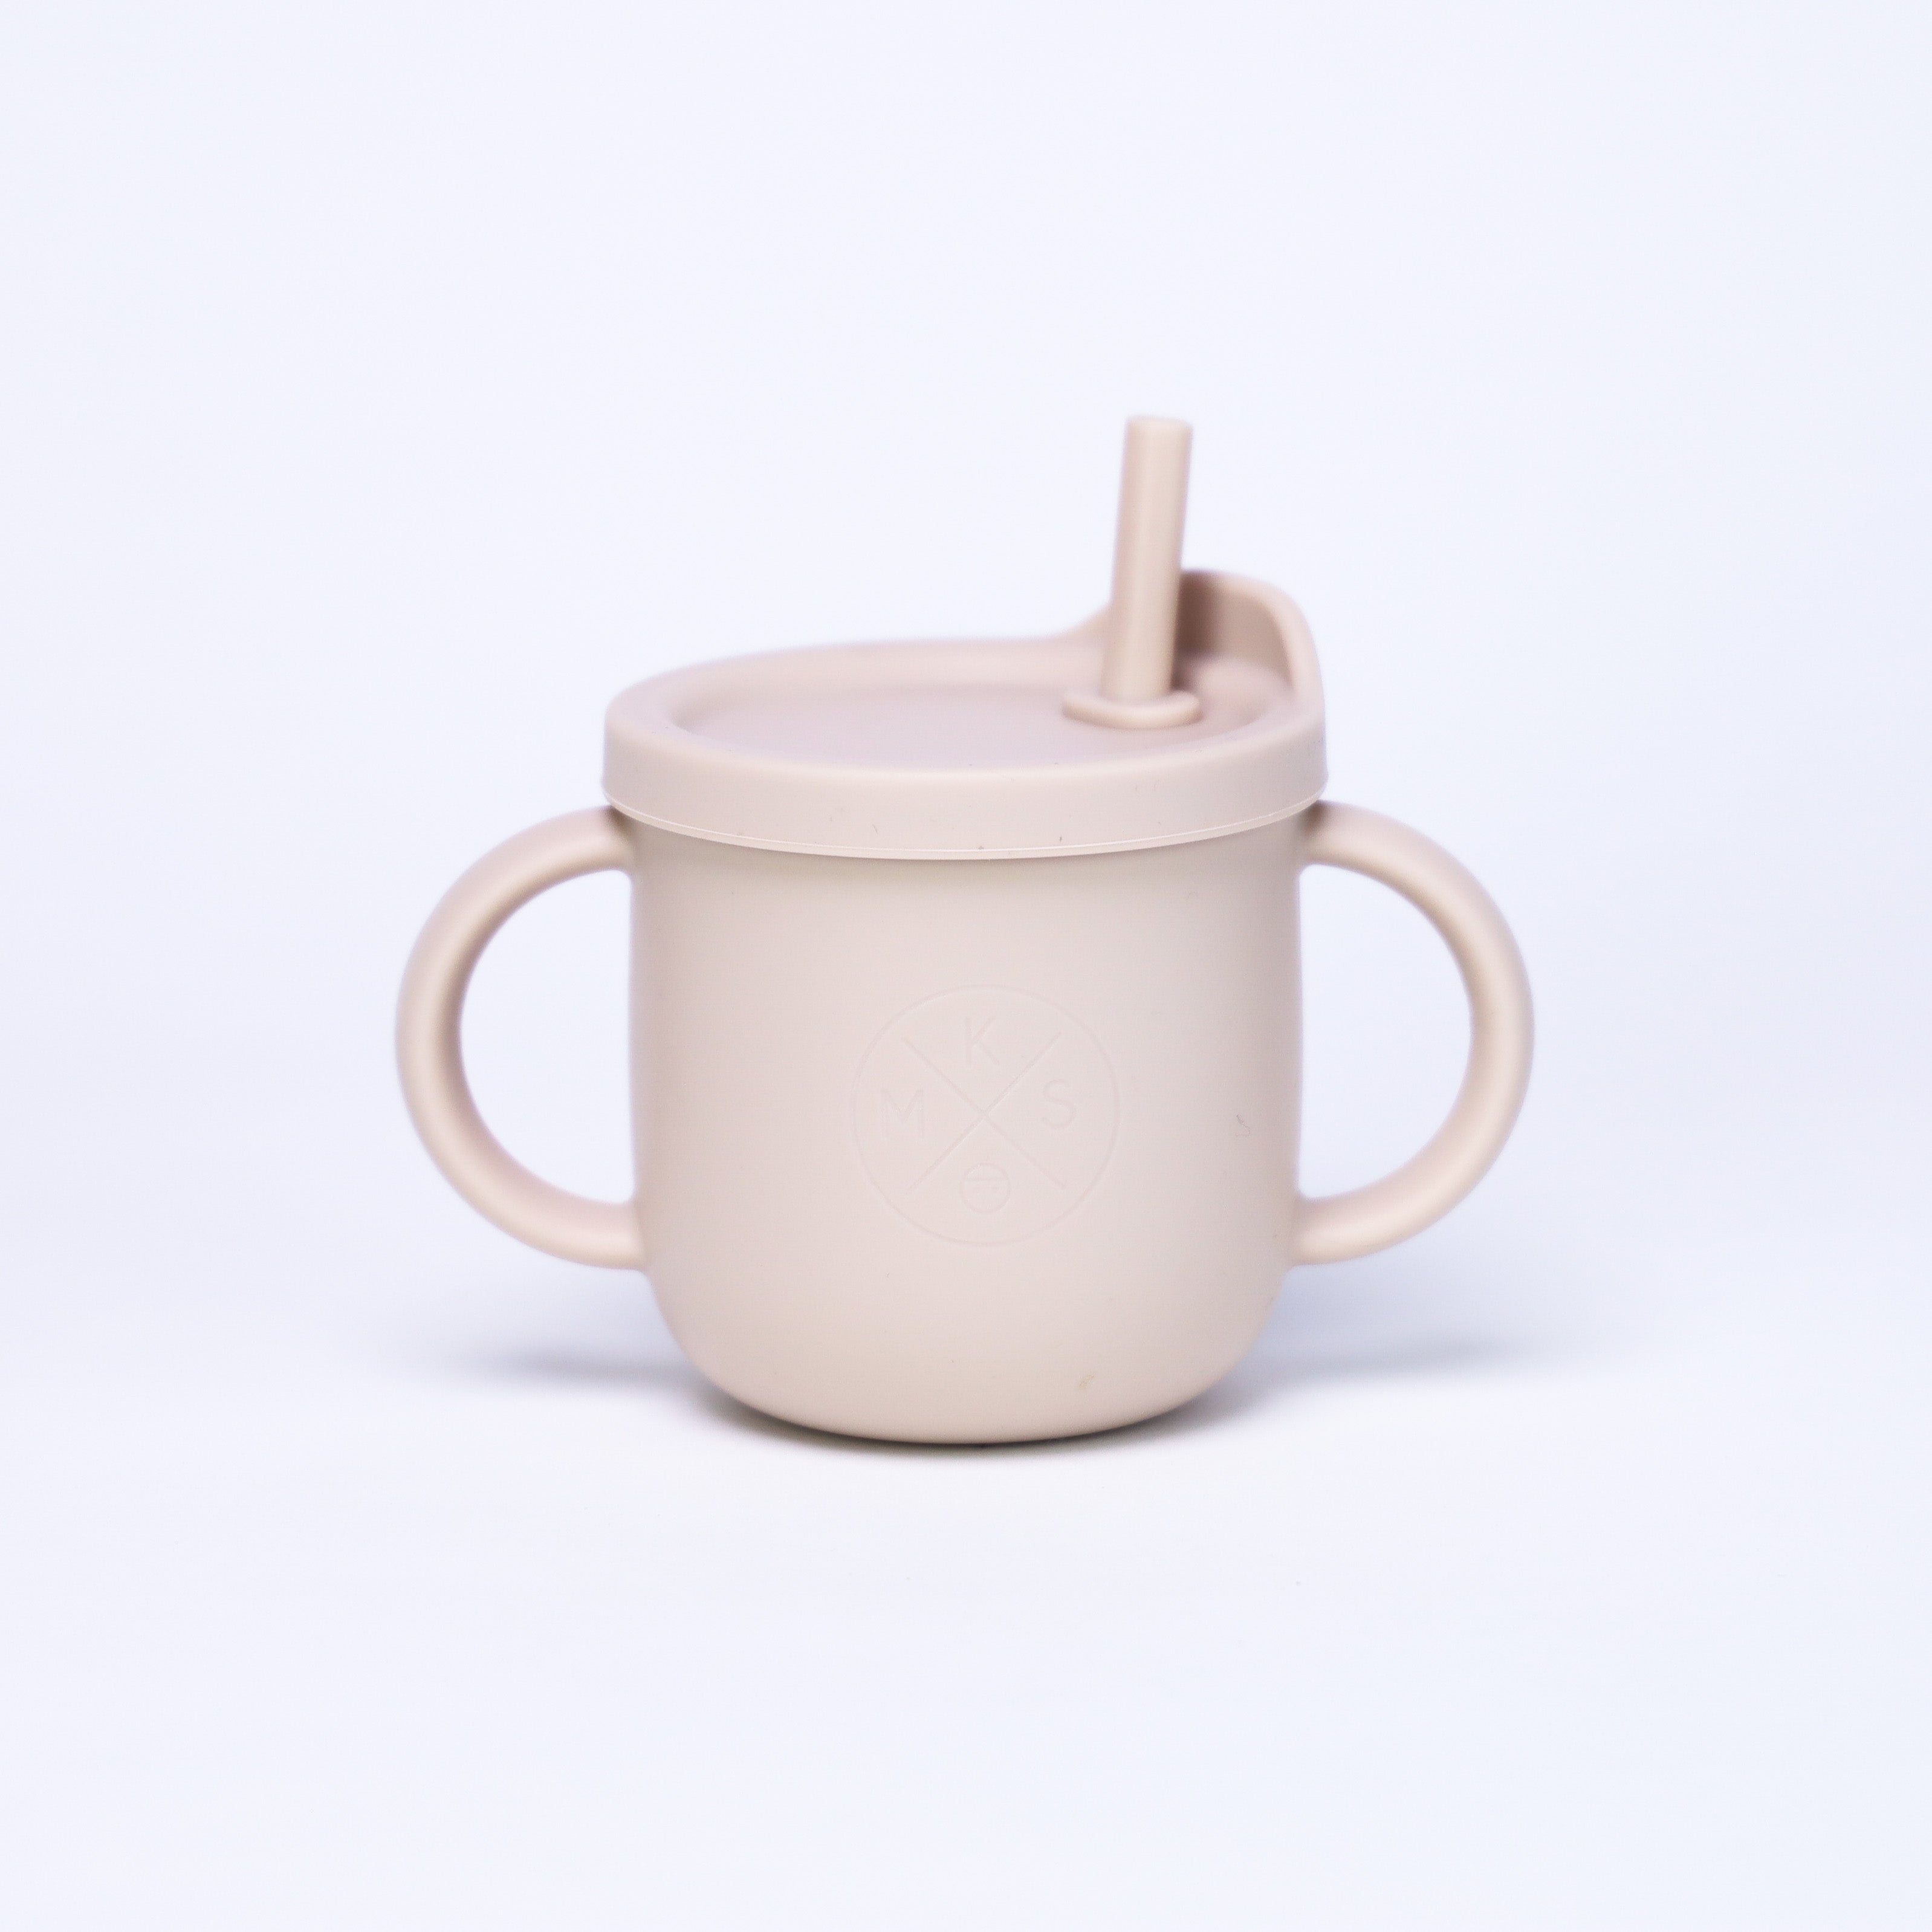 Silicone all in one cup sippy snack baby toddler kids cup with straw lid MKS Miminoo USA unbreakable durable dinnerware cream beige